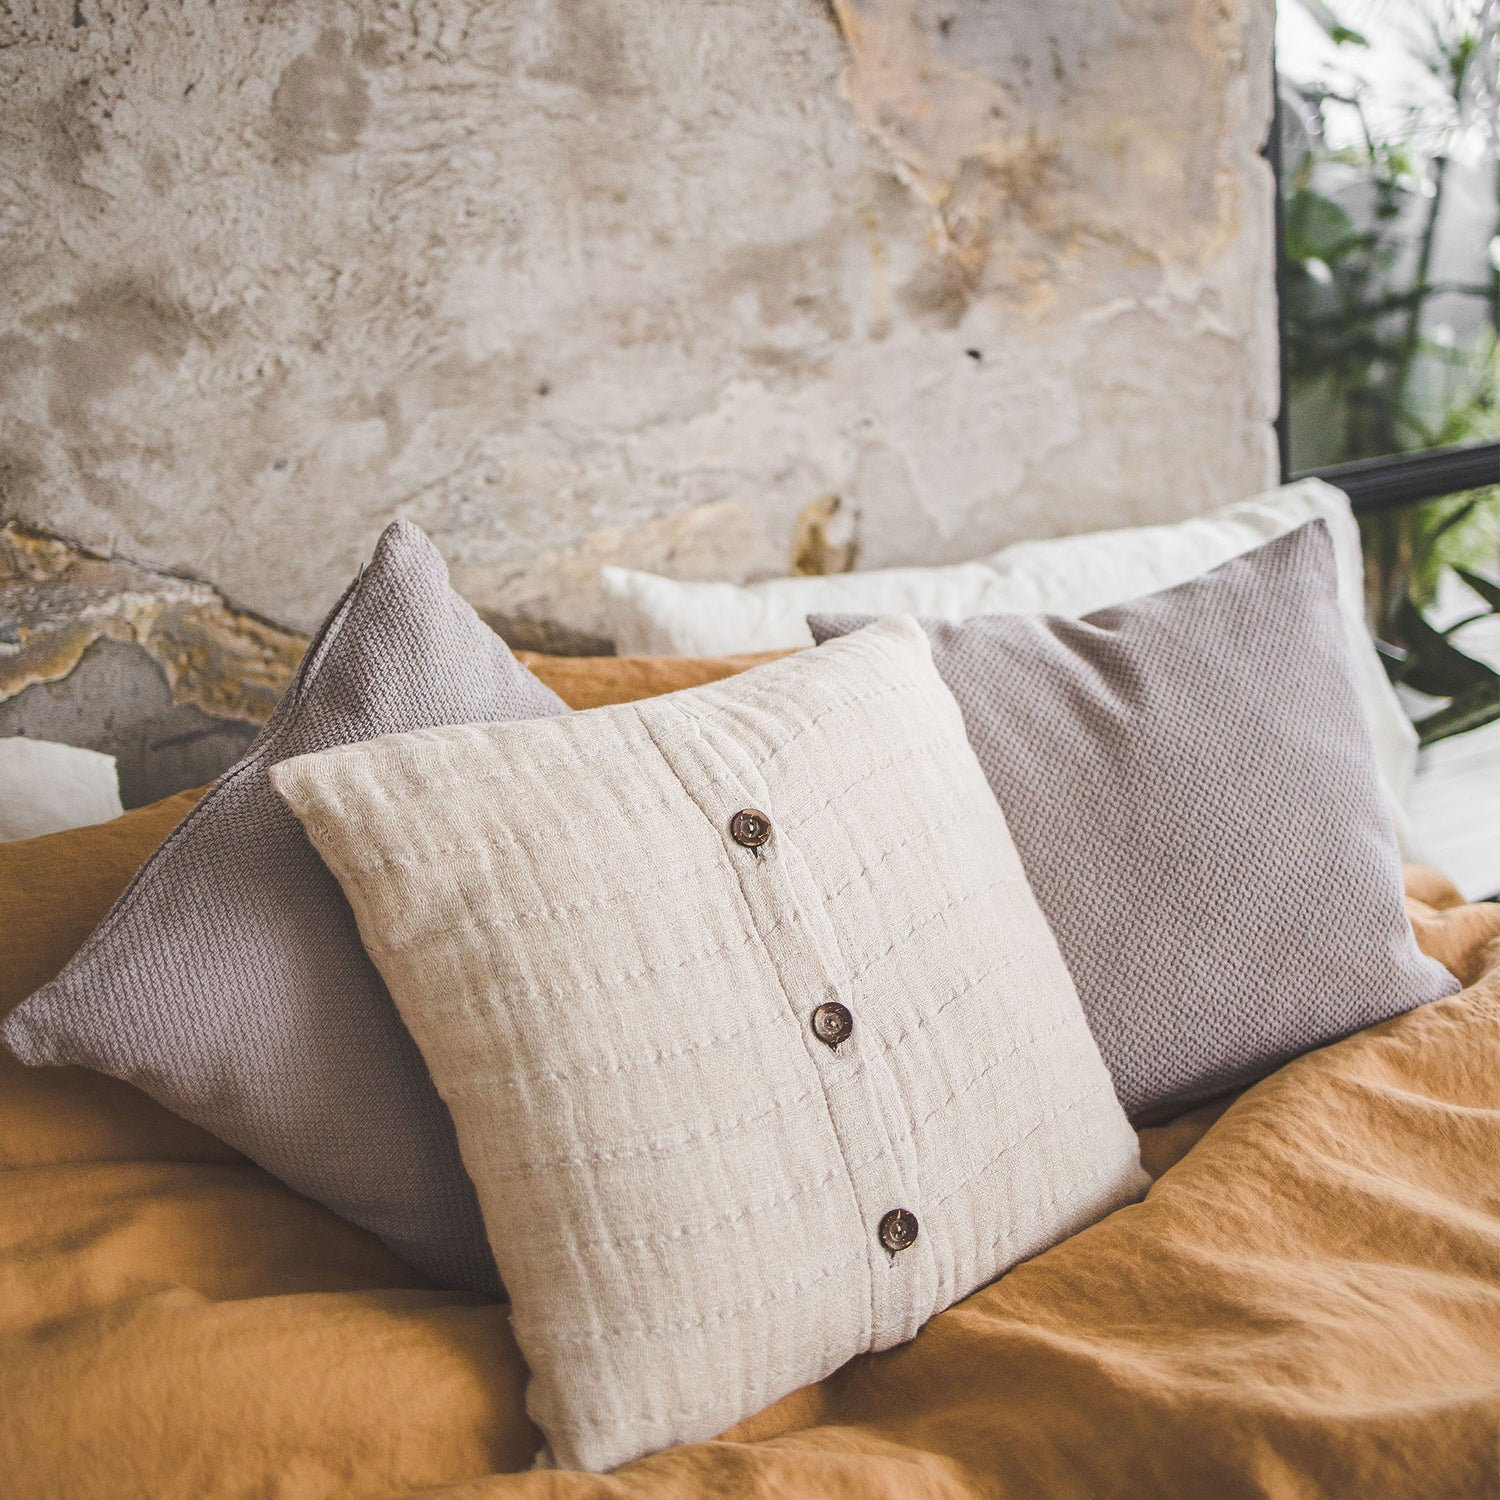 Linen and cotton cushion covers placed on a linen bedding set.